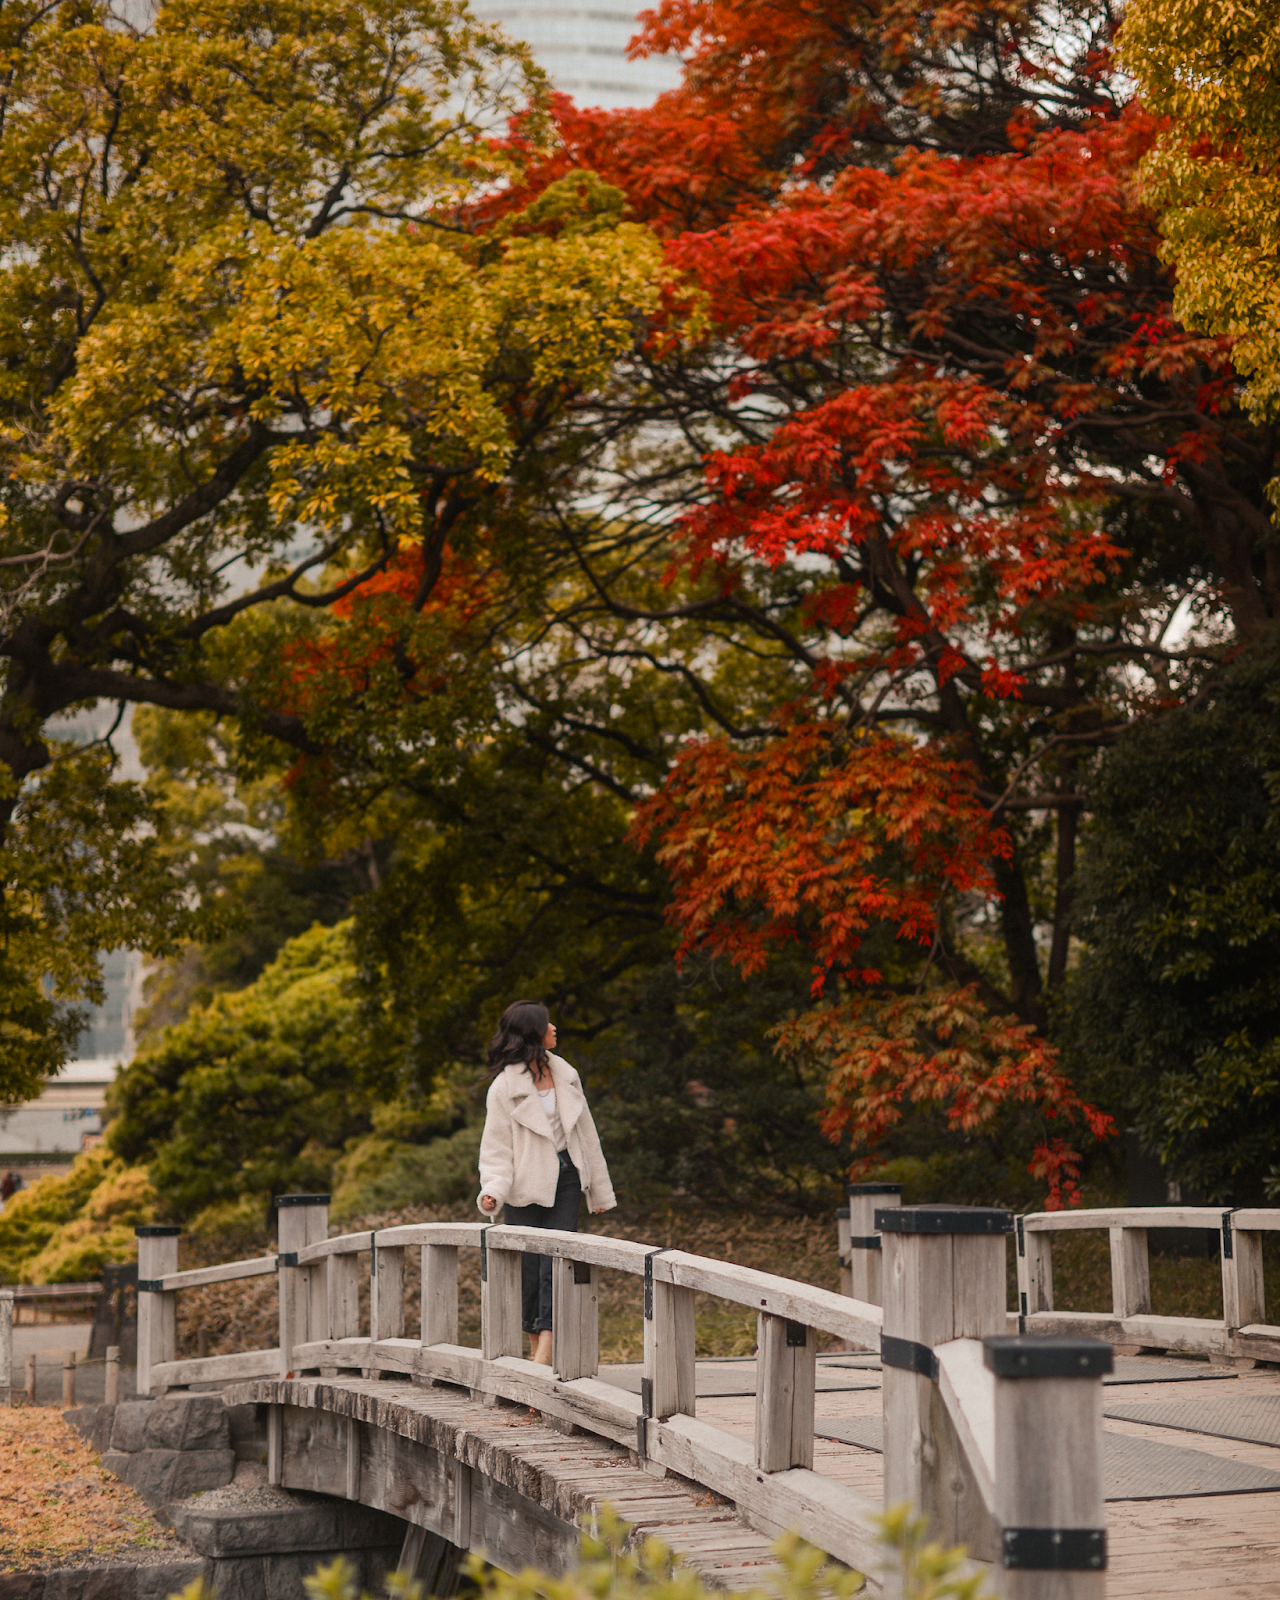 Foliage in Tokyo 2019, Tokyo in the fall - FOREVERVANNY